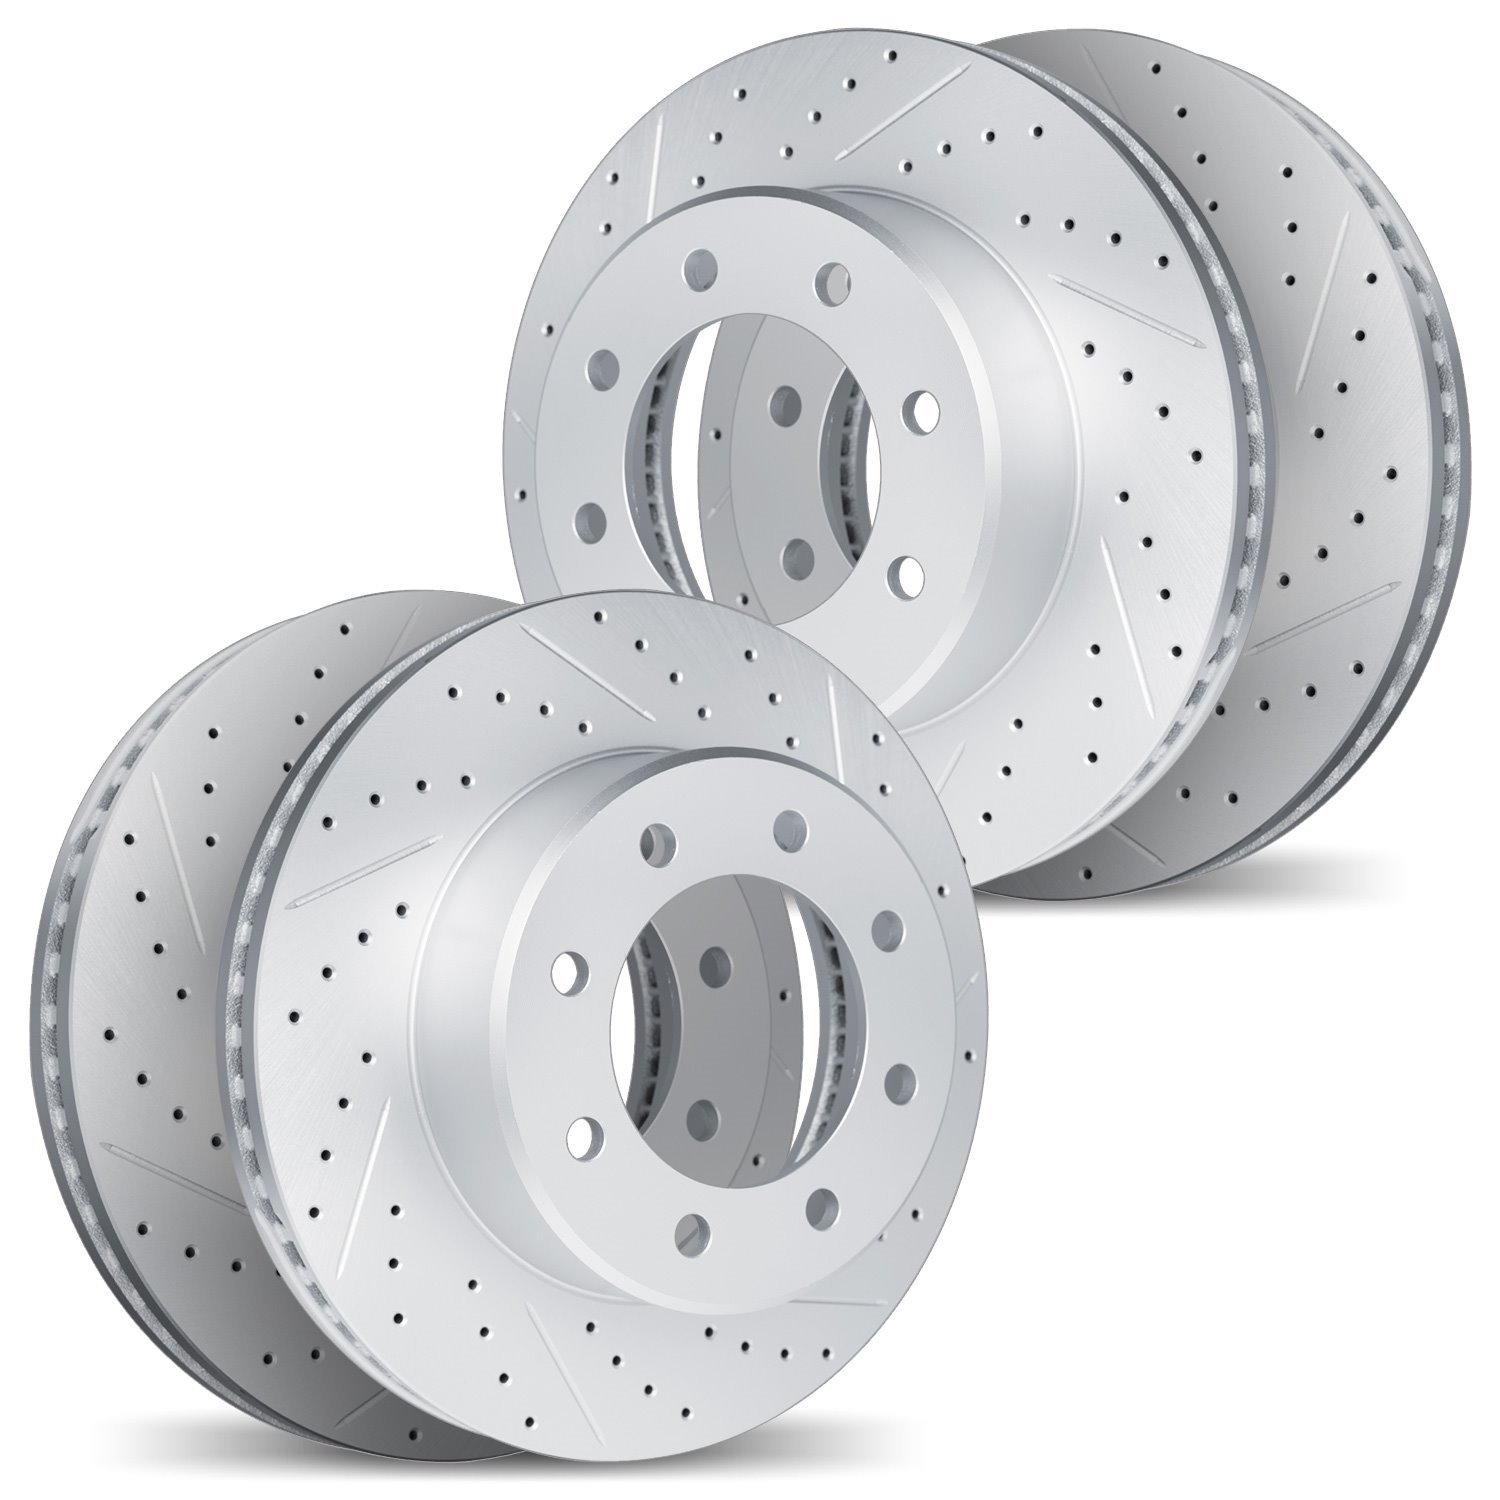 2004-40048 Geoperformance Drilled/Slotted Brake Rotors, Fits Select Mopar, Position: Front and Rear